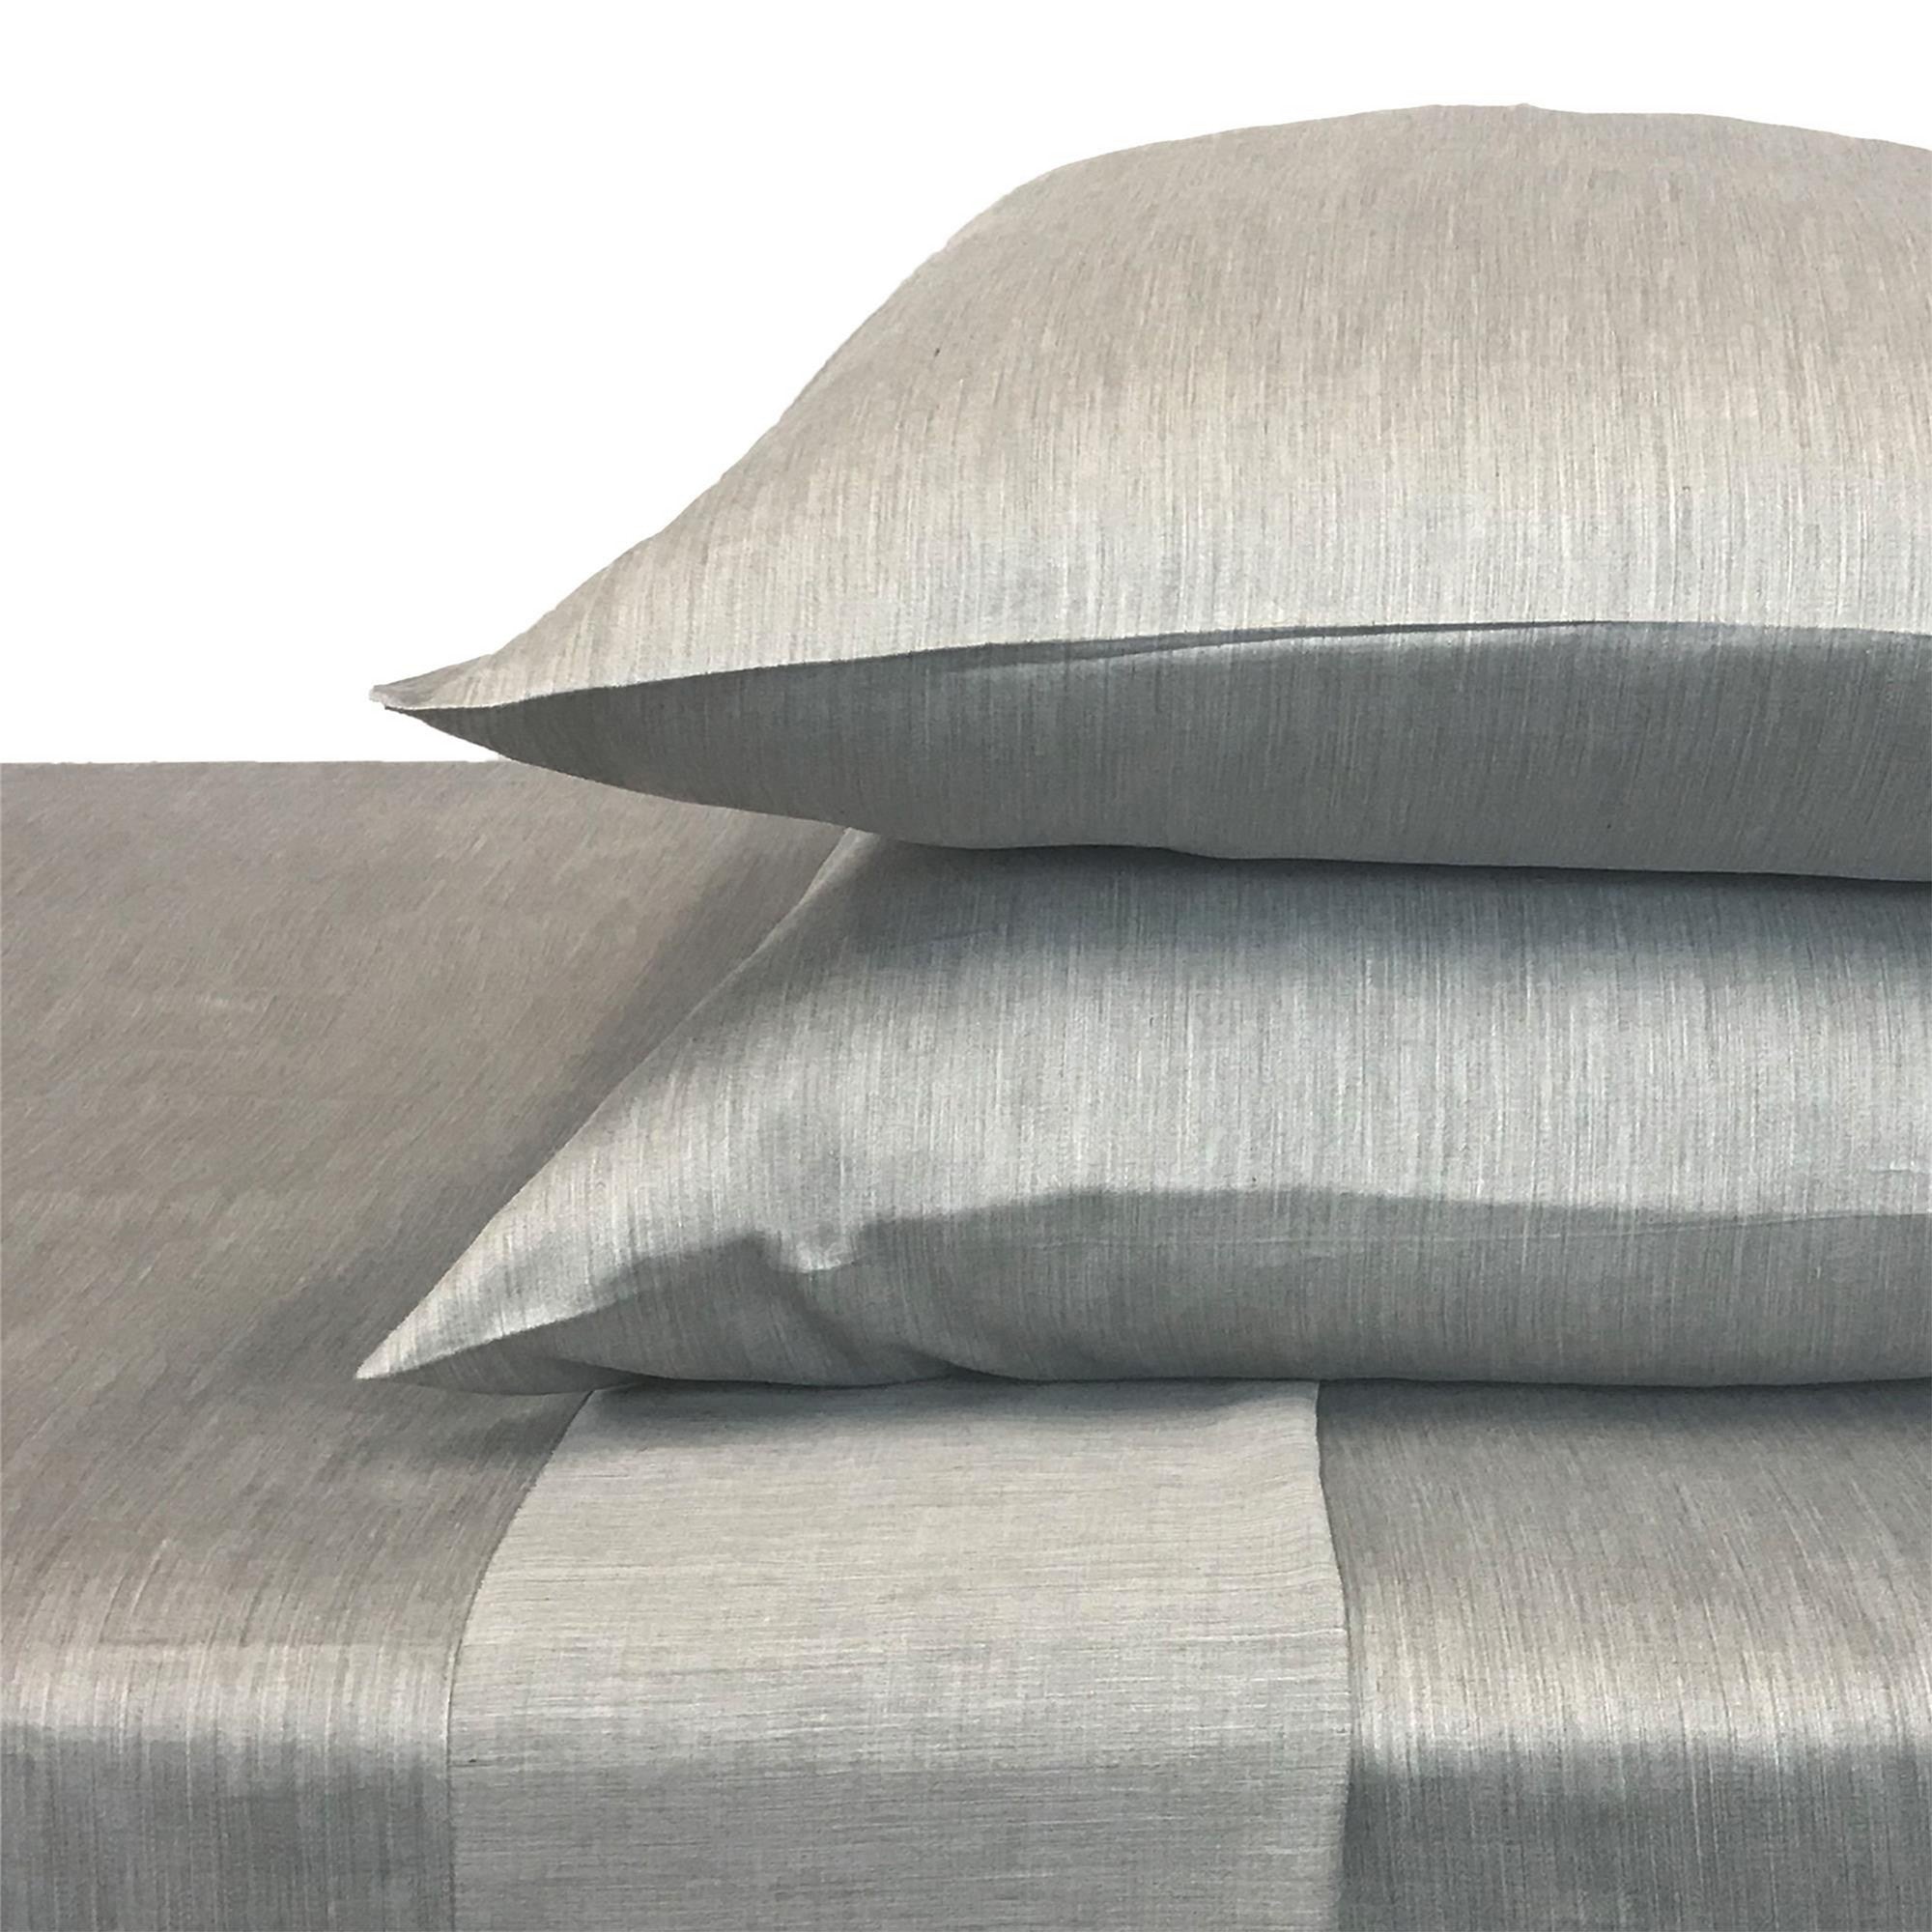 MELANGE Bamboo Pillowcase Sets - Rich, Cozy and Comfortable Pillow Cover Sets For Better Sleep - Silver